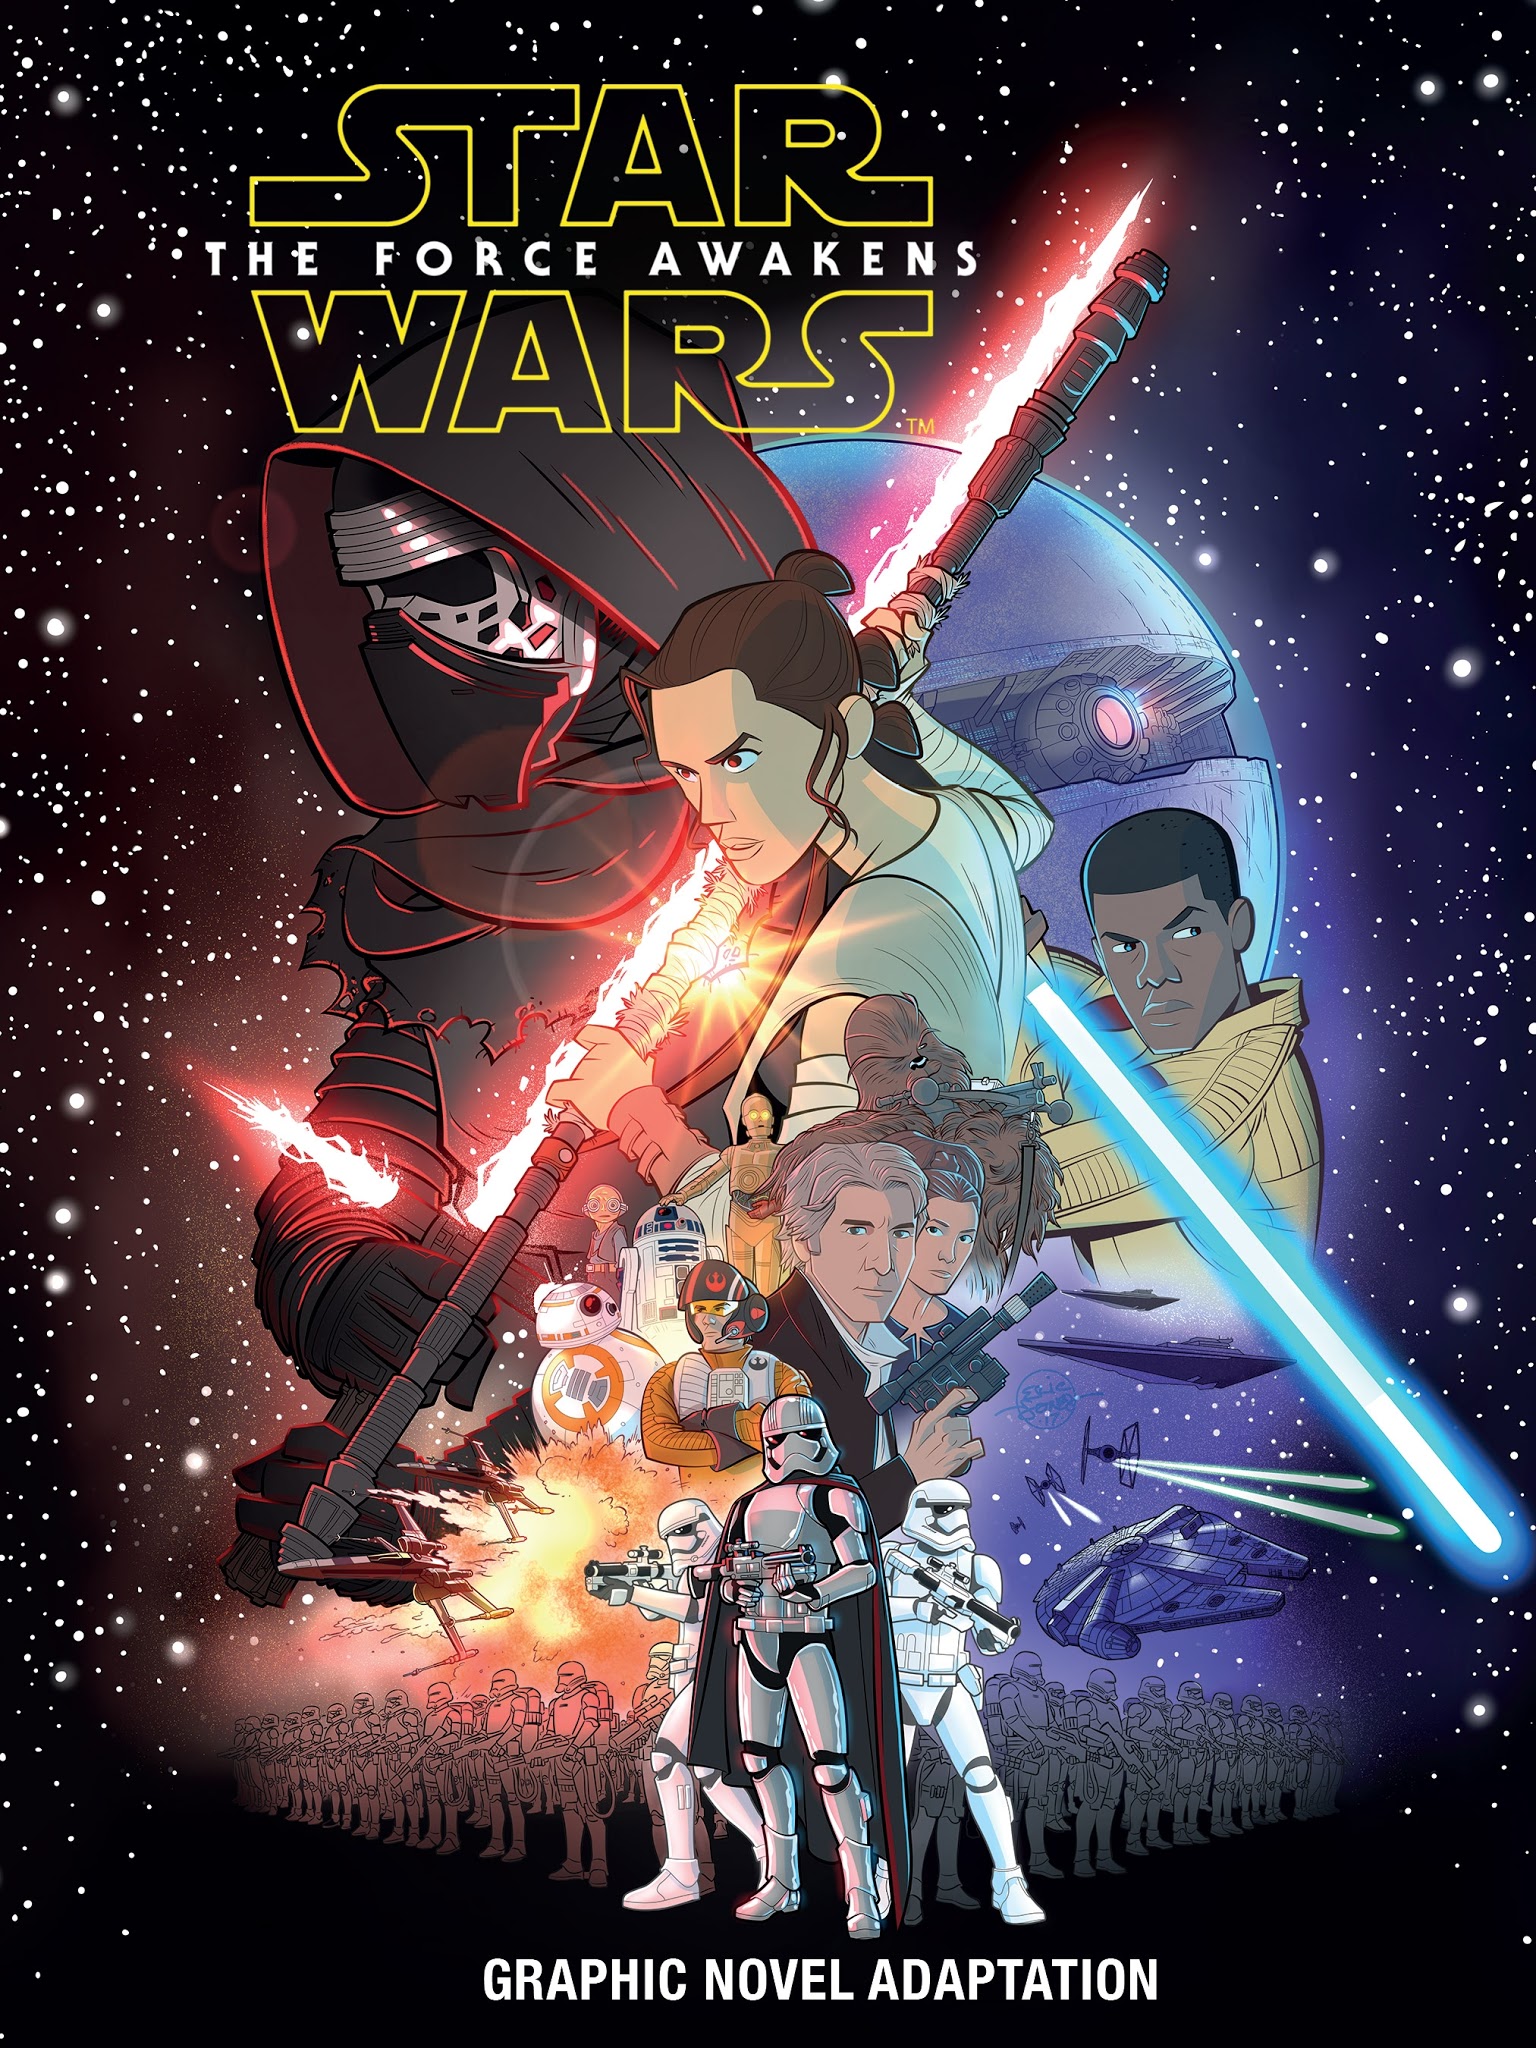 Read online Star Wars: The Force Awakens Graphic Novel Adaptation comic -  Issue # Full - 1